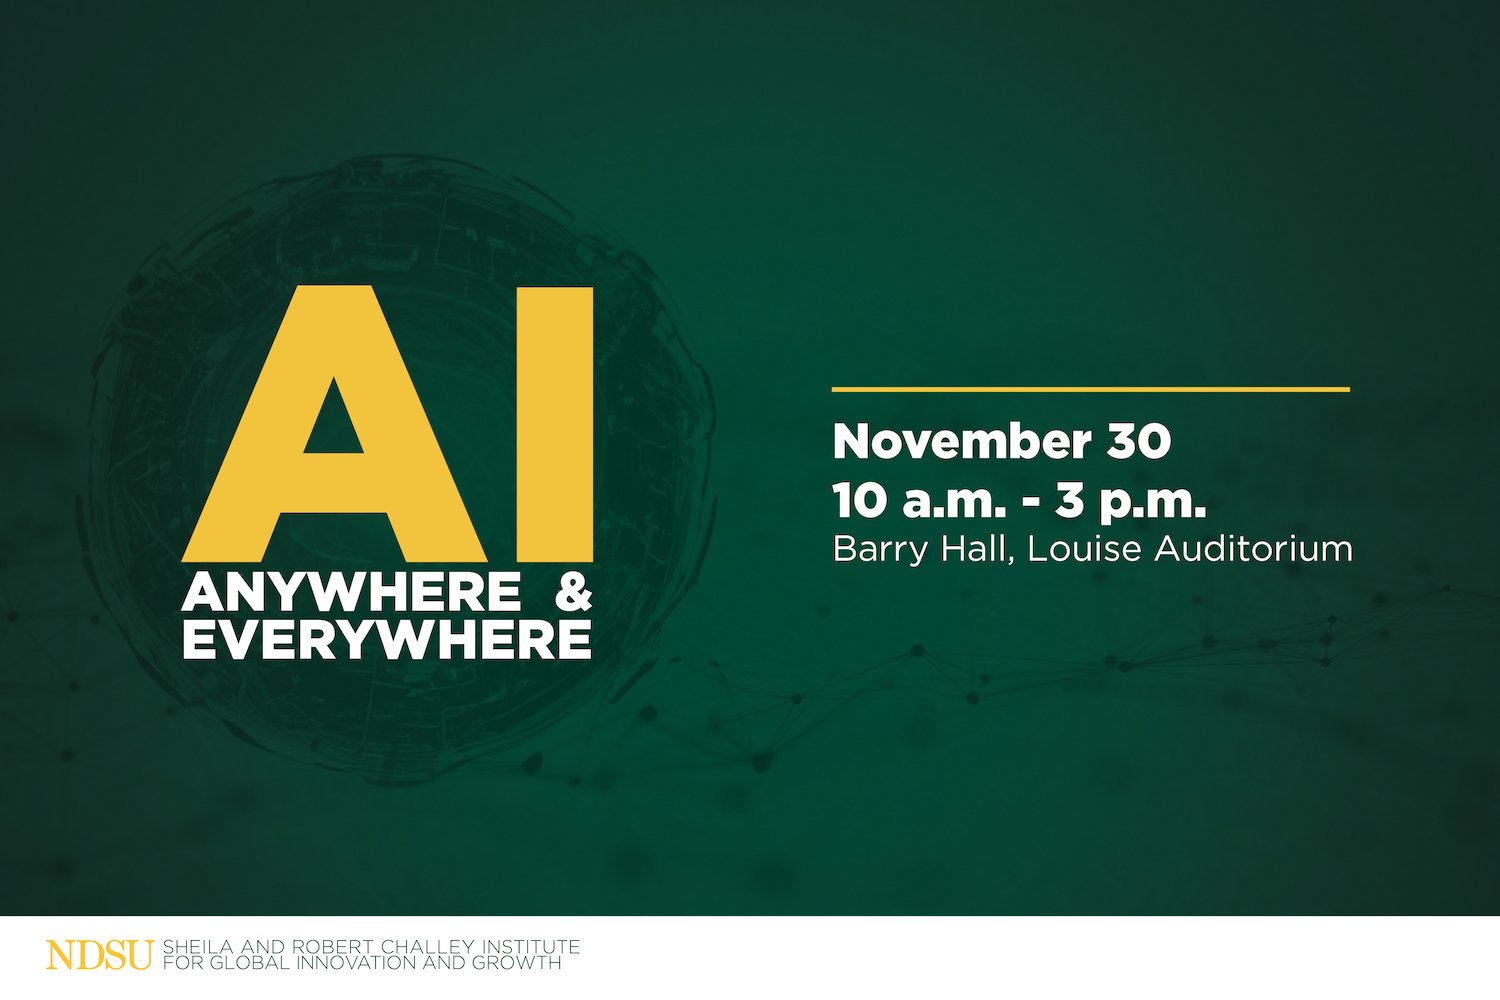 The Challey Institute is pleased to present an all-day event on Artificial Intelligence on Thursday, Nov. 30, in the Louise S. Barry Auditorium at NDSU’s Barry Hall.